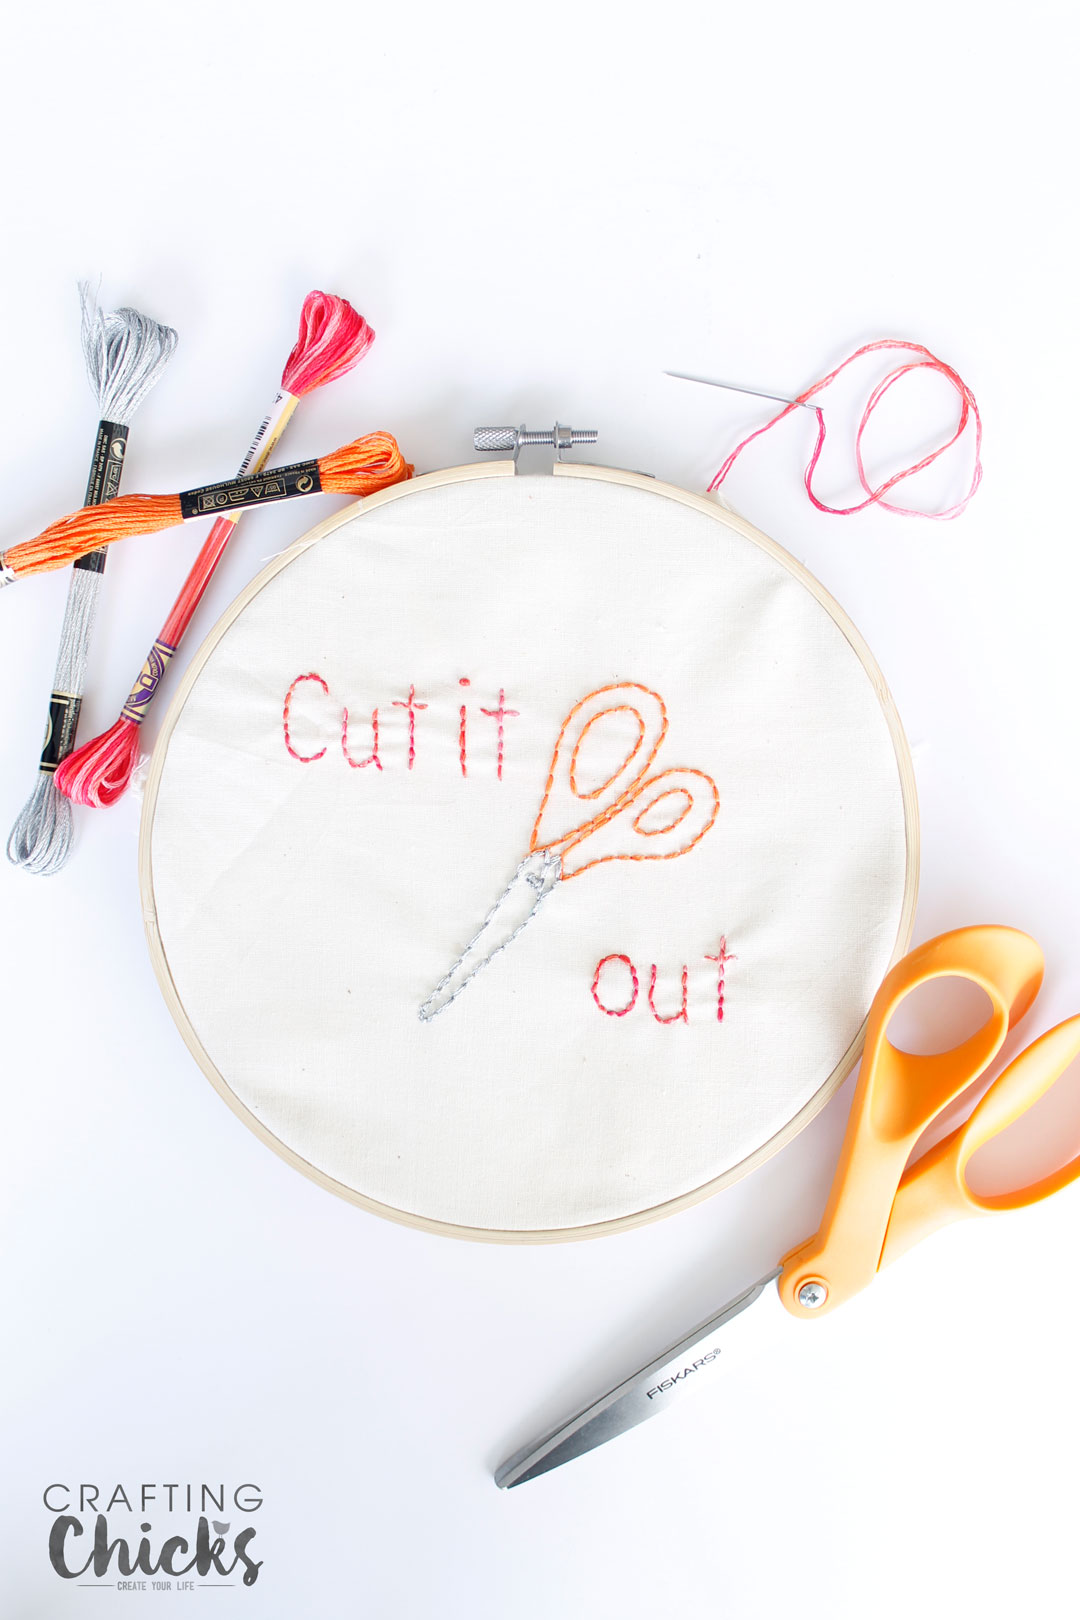 Looking for the perfect addition to your sewing room? This "Cut it Out" Handstitching Pattern is the perfect project to add that extra touch of fun. Pattern is easy enough for a beginner, but loads of fun for anyone.